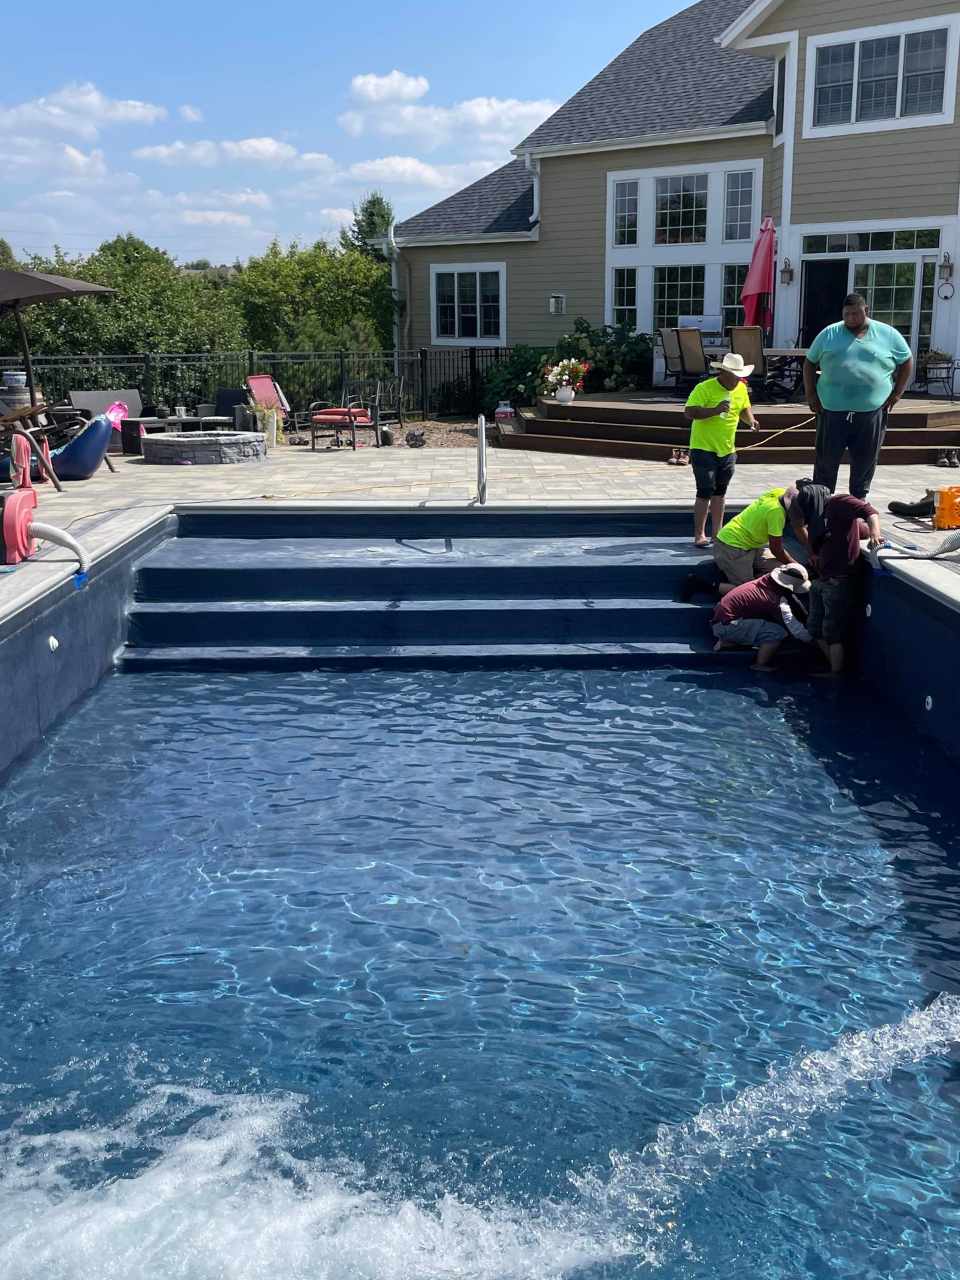 Final stages of a new pool installation in Hartland with workers finishing details and water already filled in the pool.